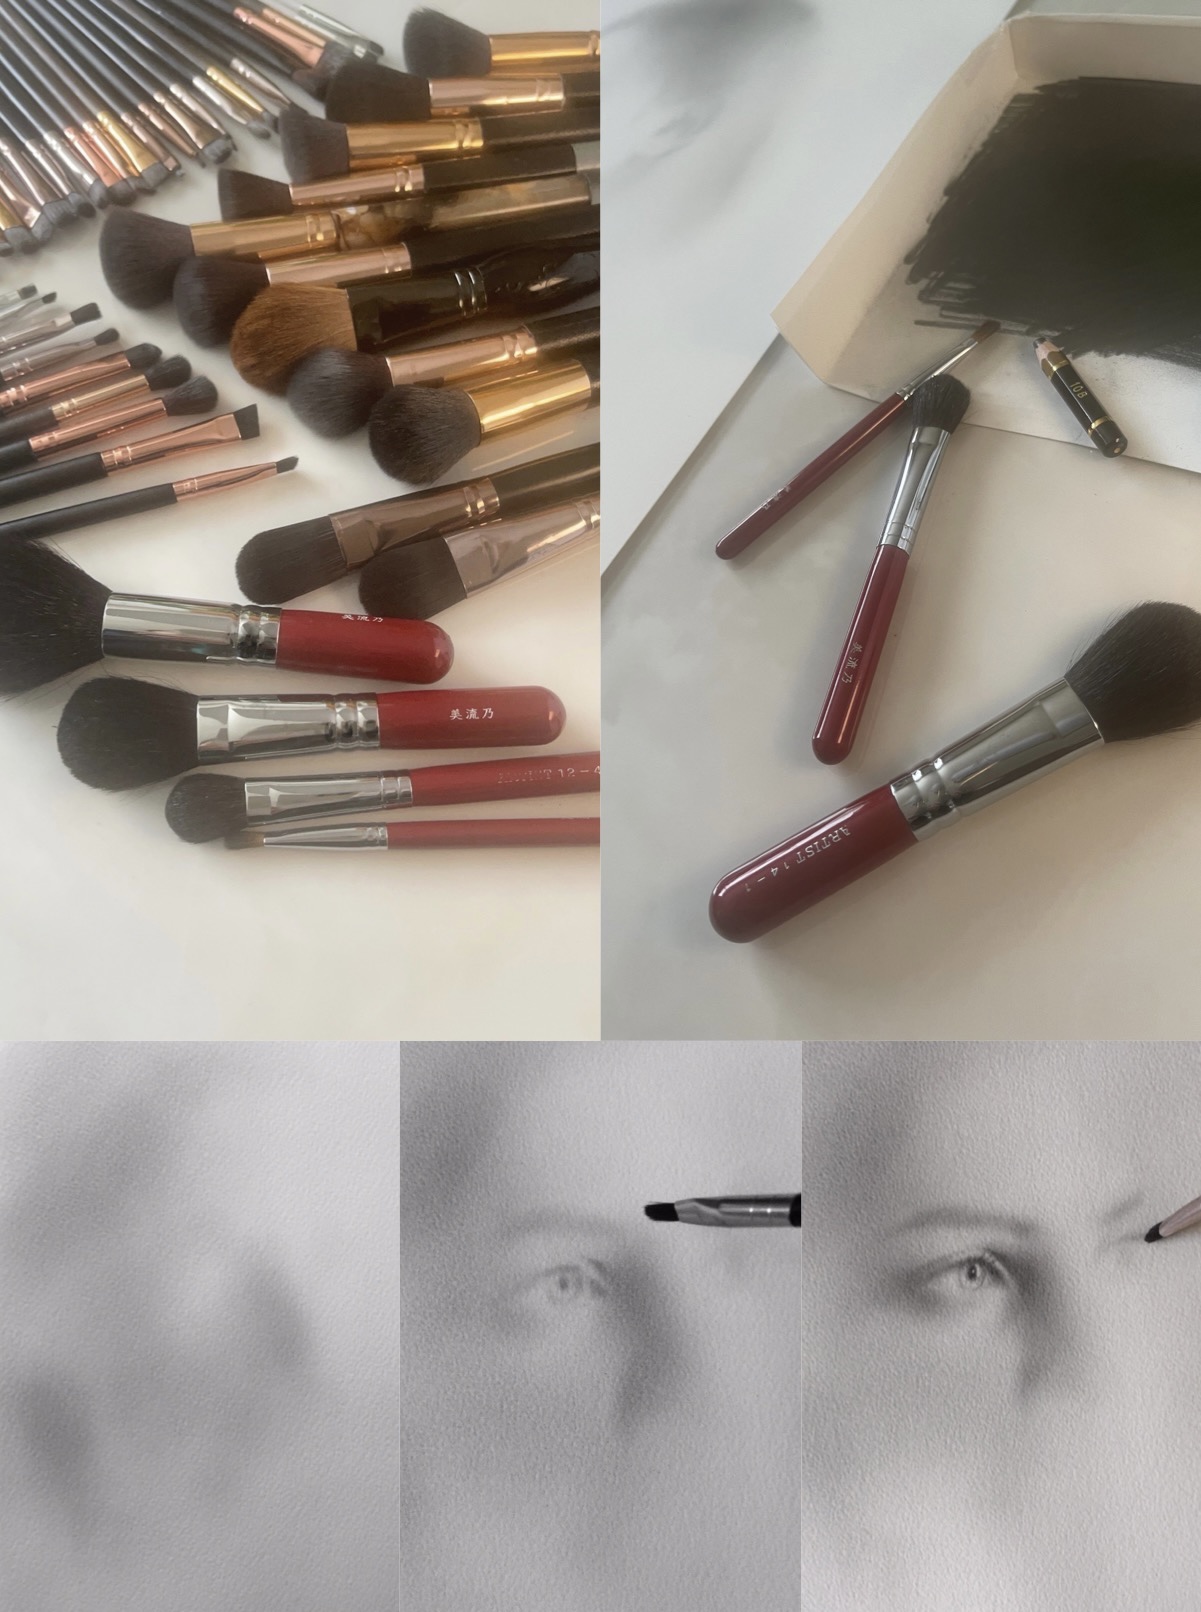 Milno’s main drawing tool ‘makeup brushes’ and a small sketch